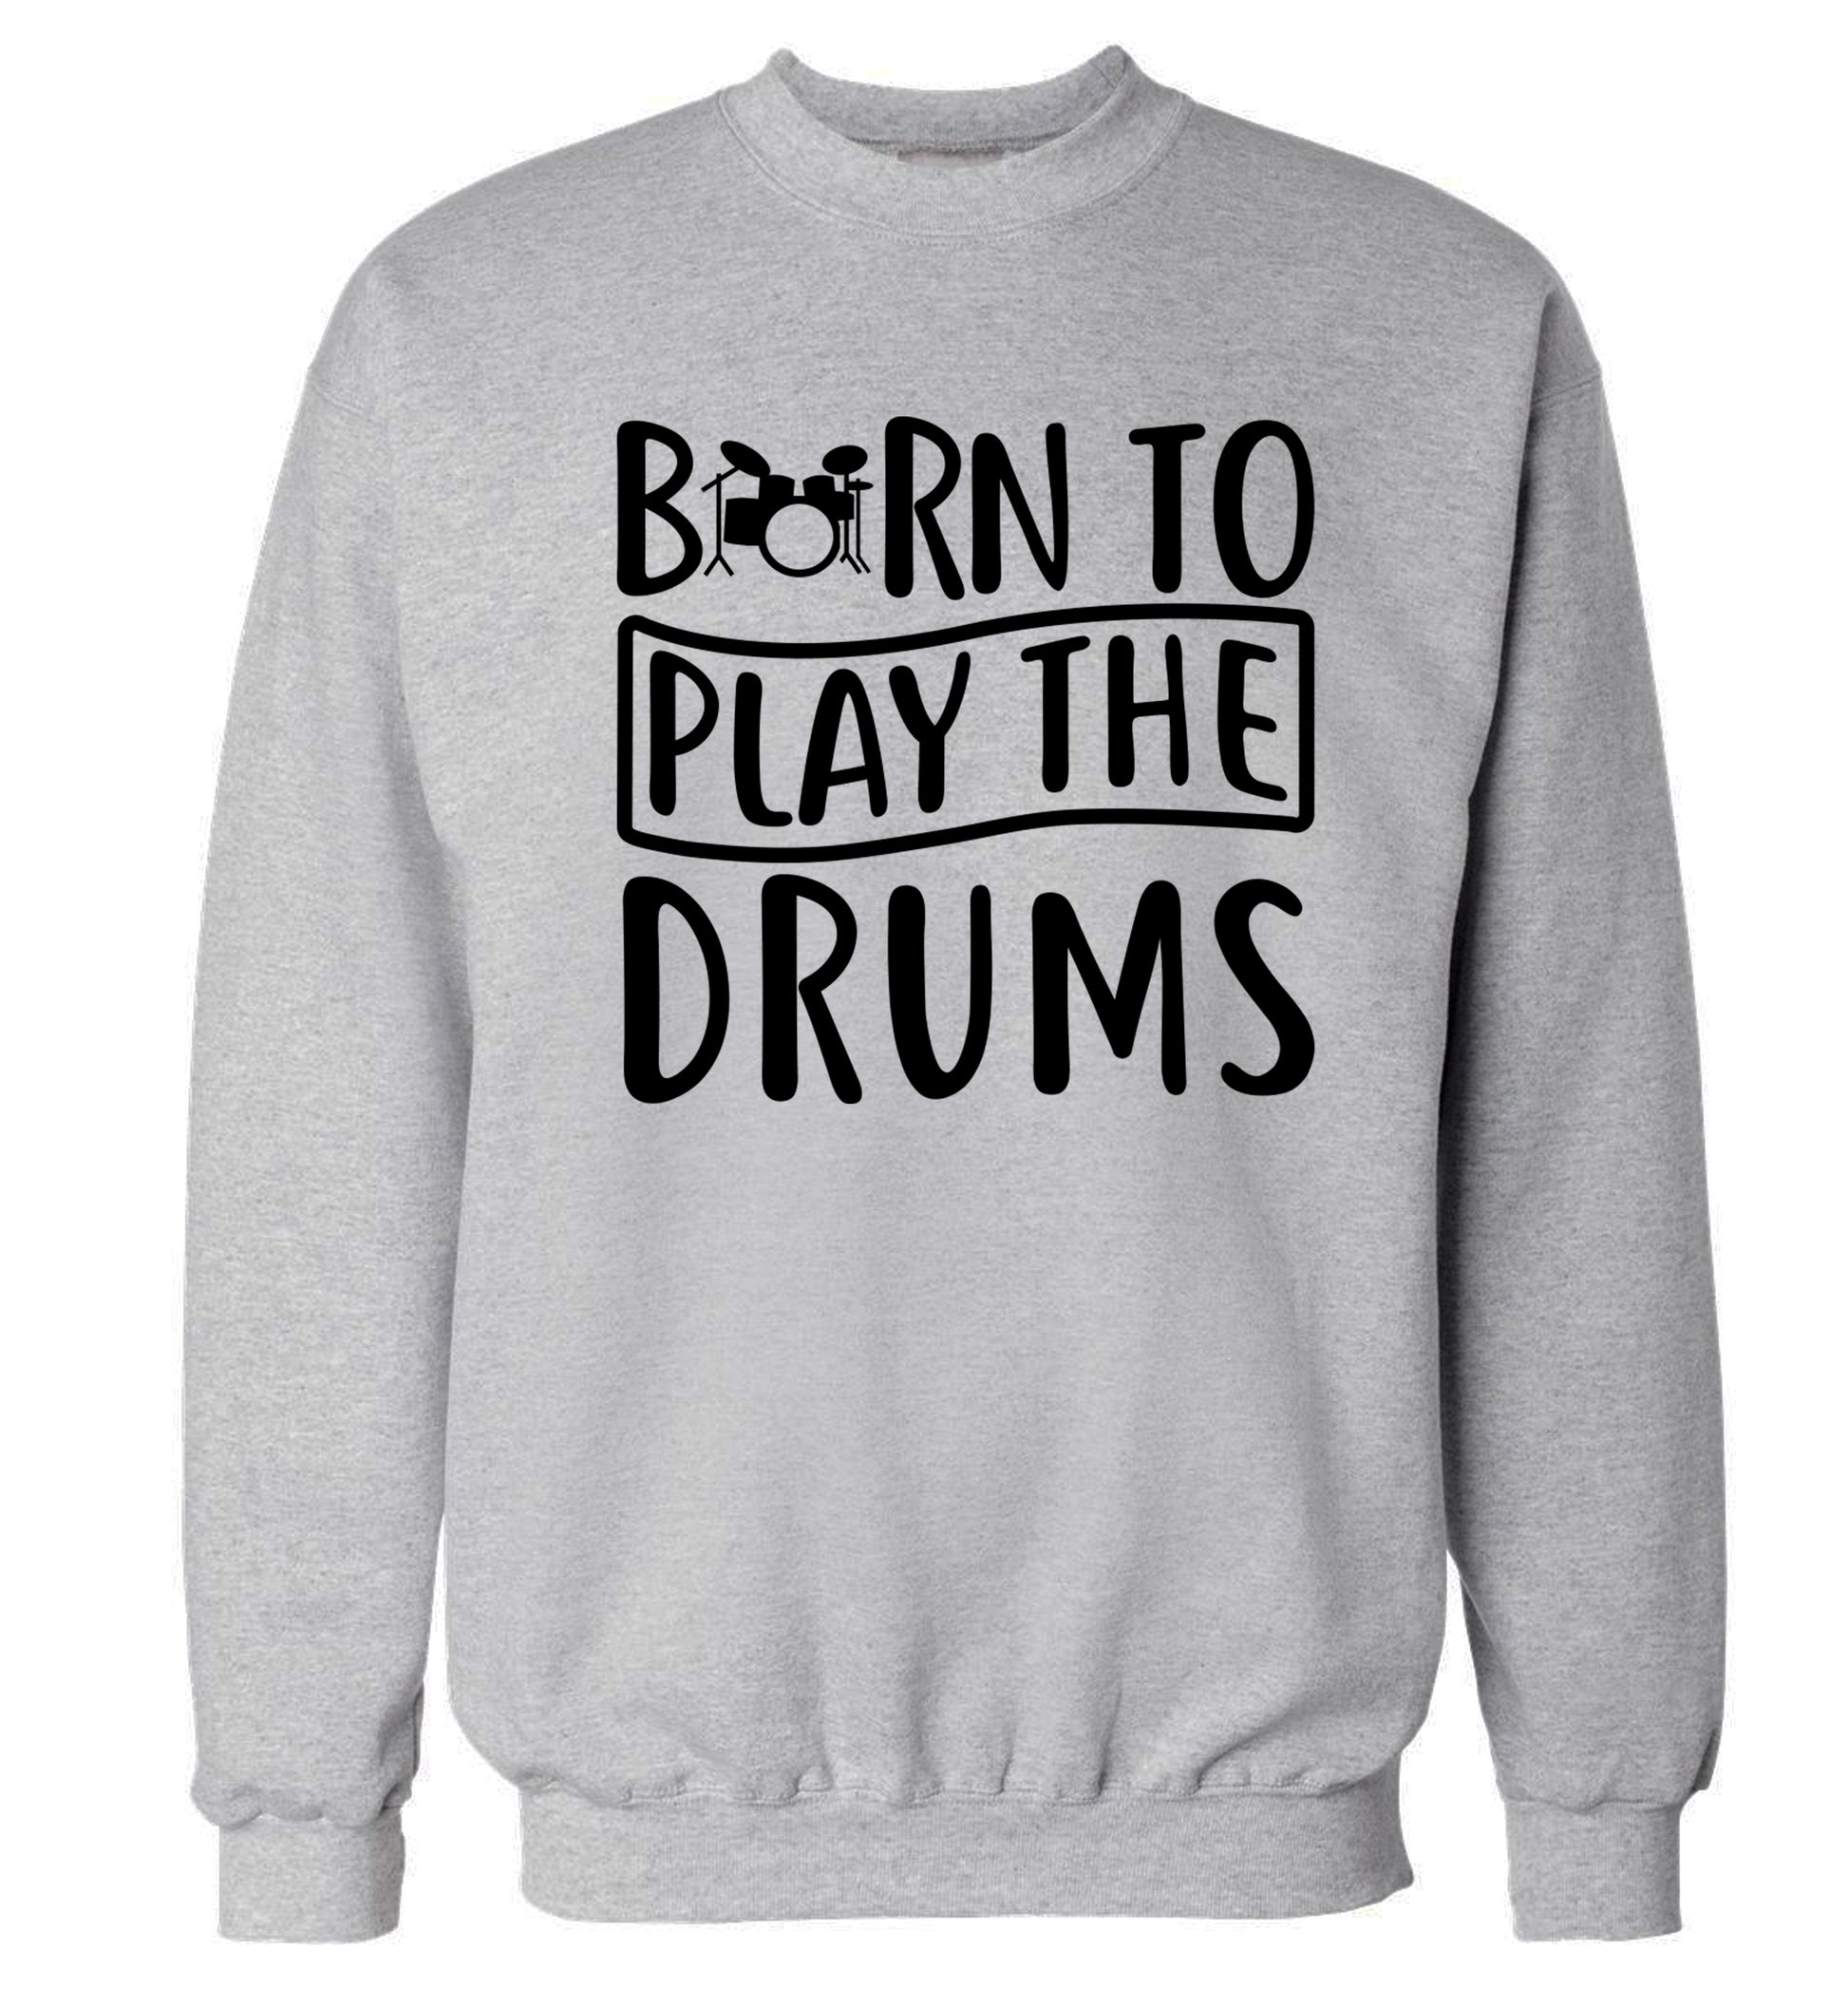 Born to play the drums Adult's unisex grey Sweater 2XL